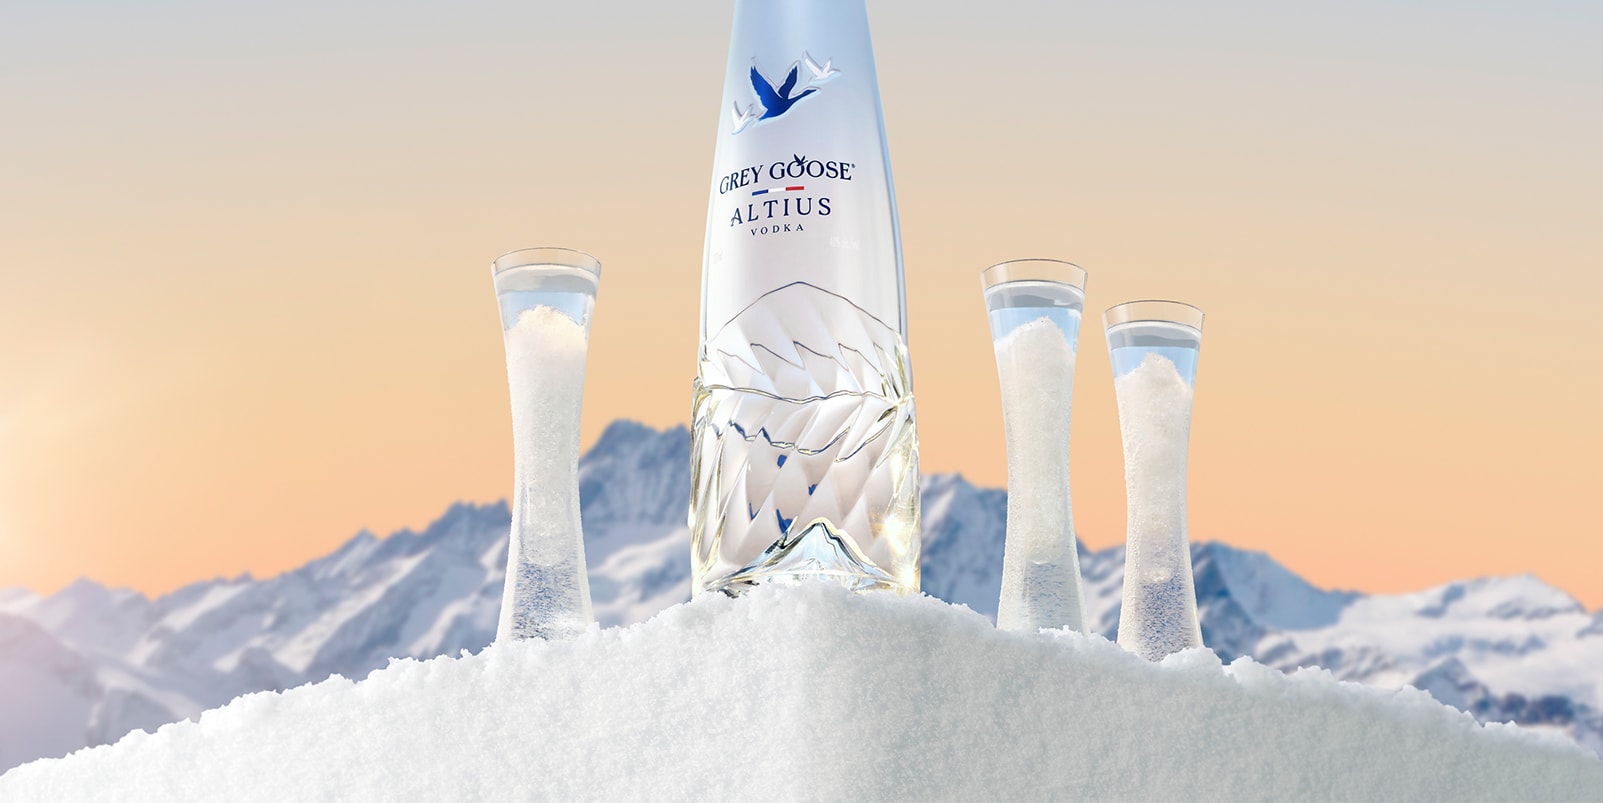 How was the concept for GREY GOOSE® Altius created?